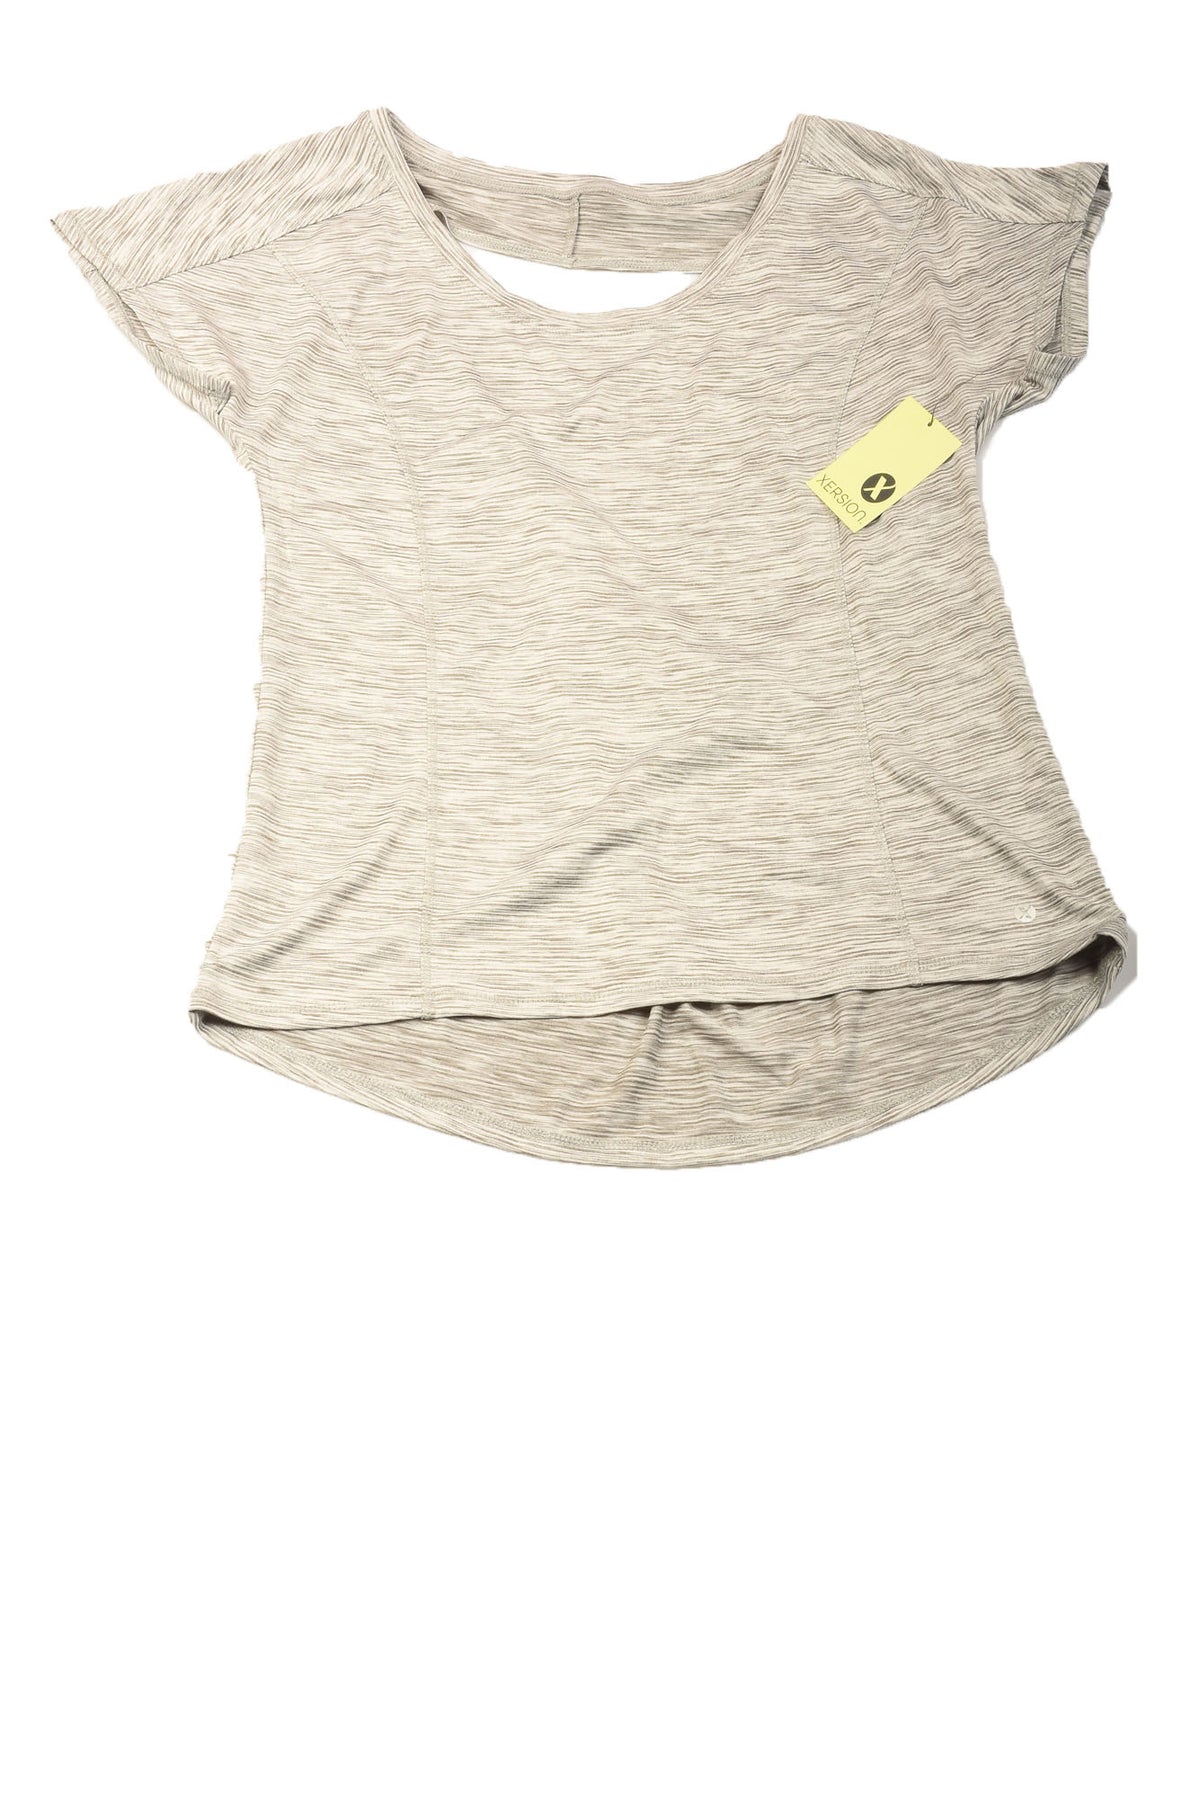 Women's Activewear Top By Xersion - Your Designer Thrift